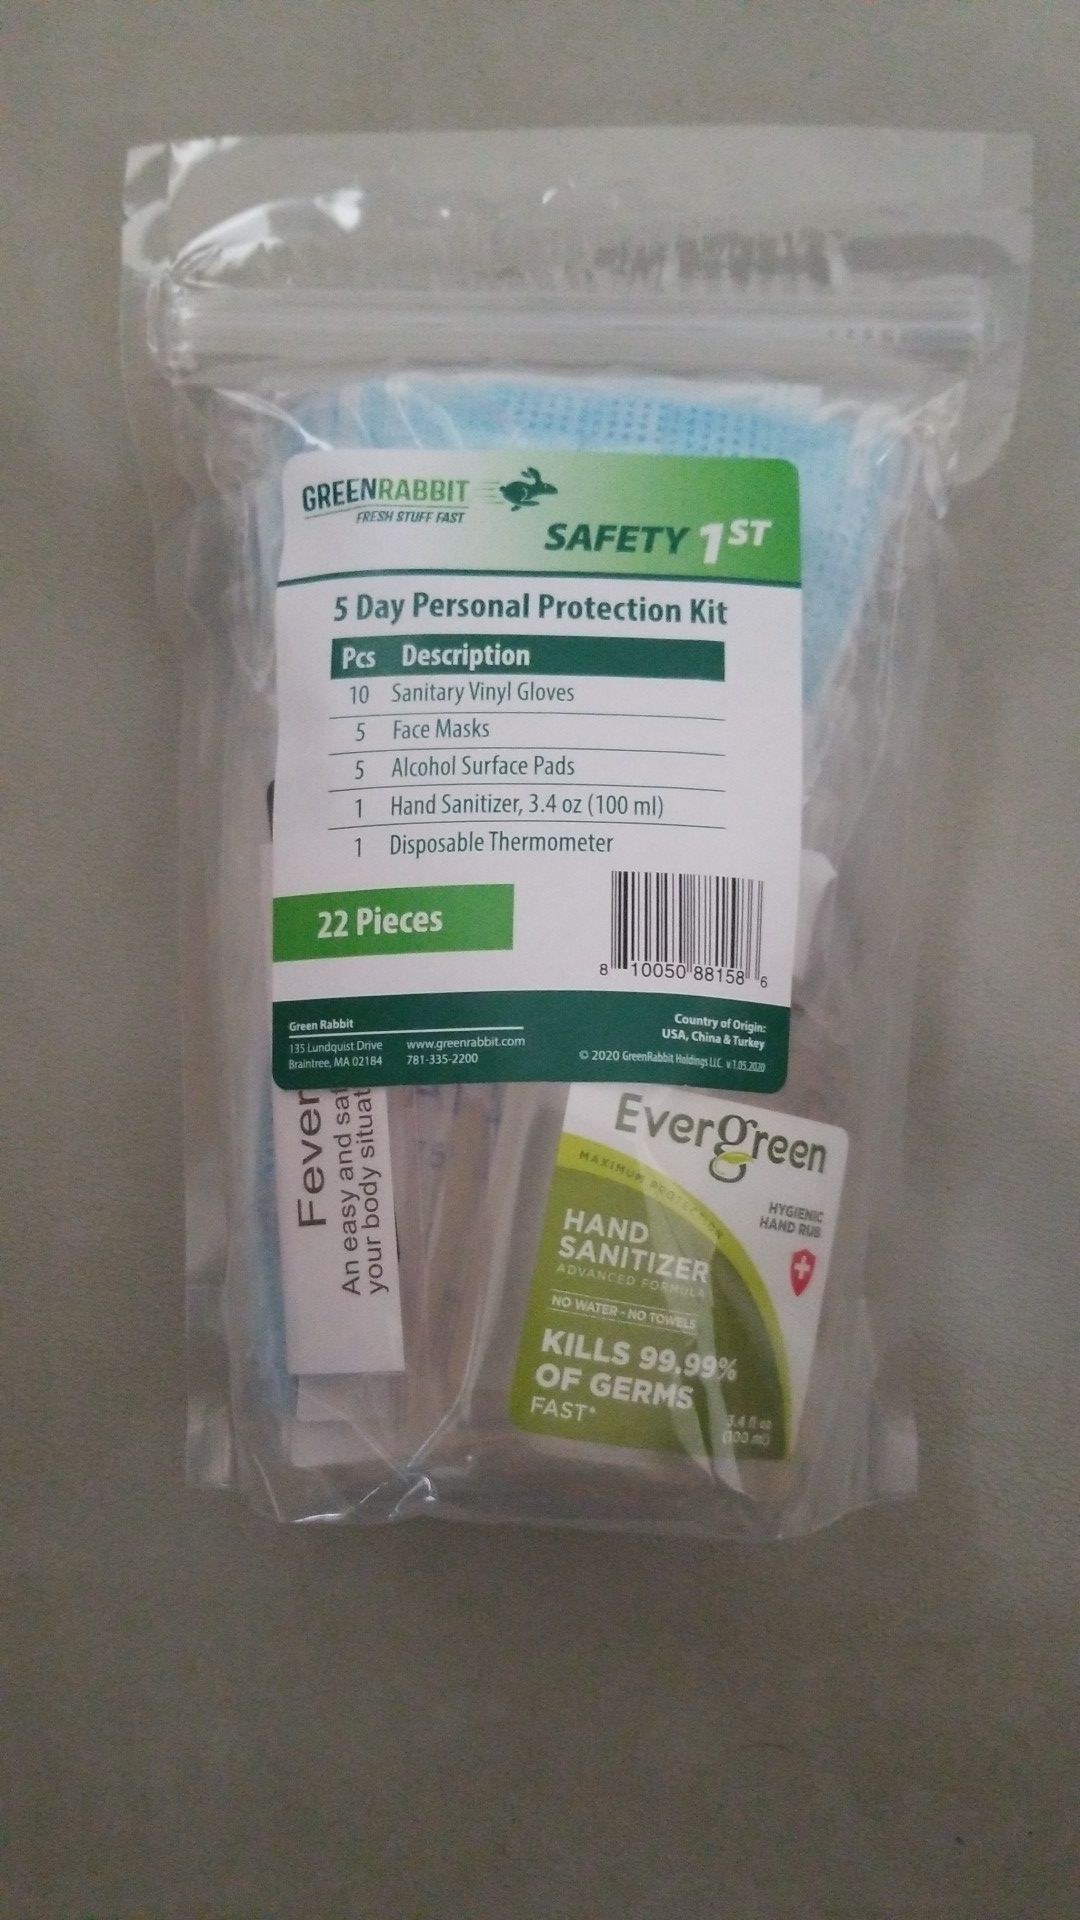 Mask Safety 1st Five Day Personal Protection Kit 22 pieces plus resealable bag